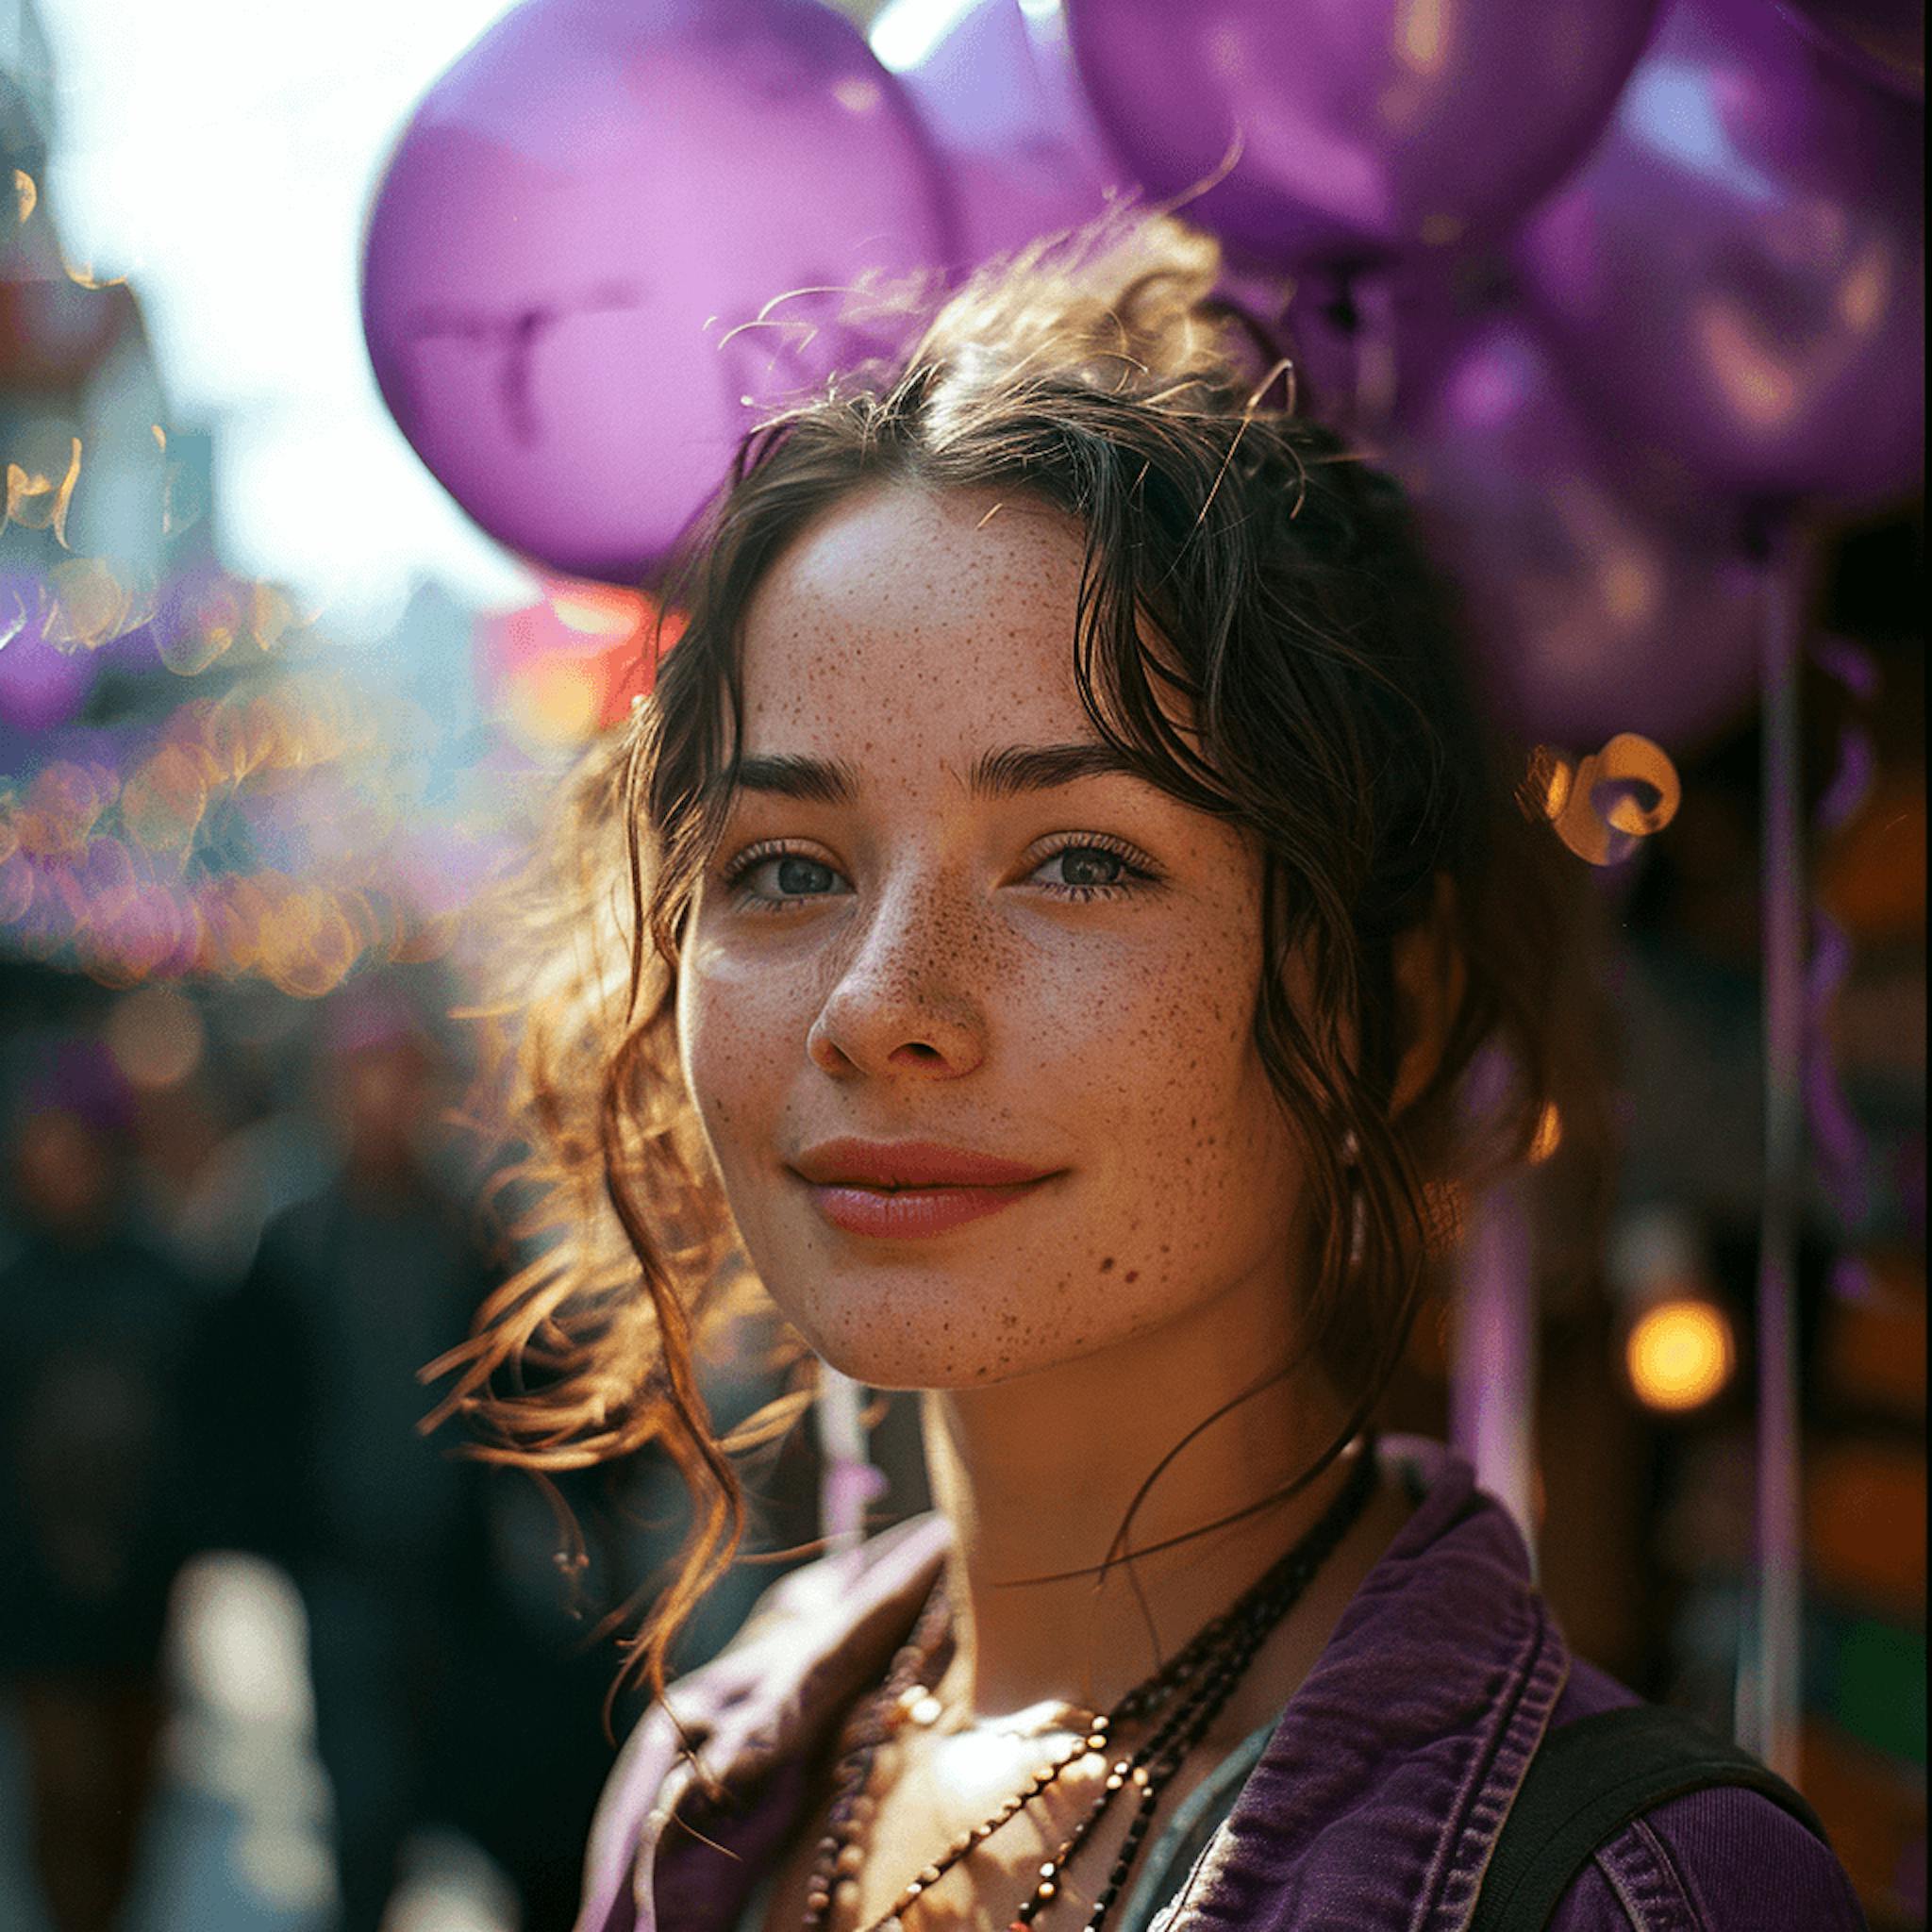 purple balloons hanging behind a young lady